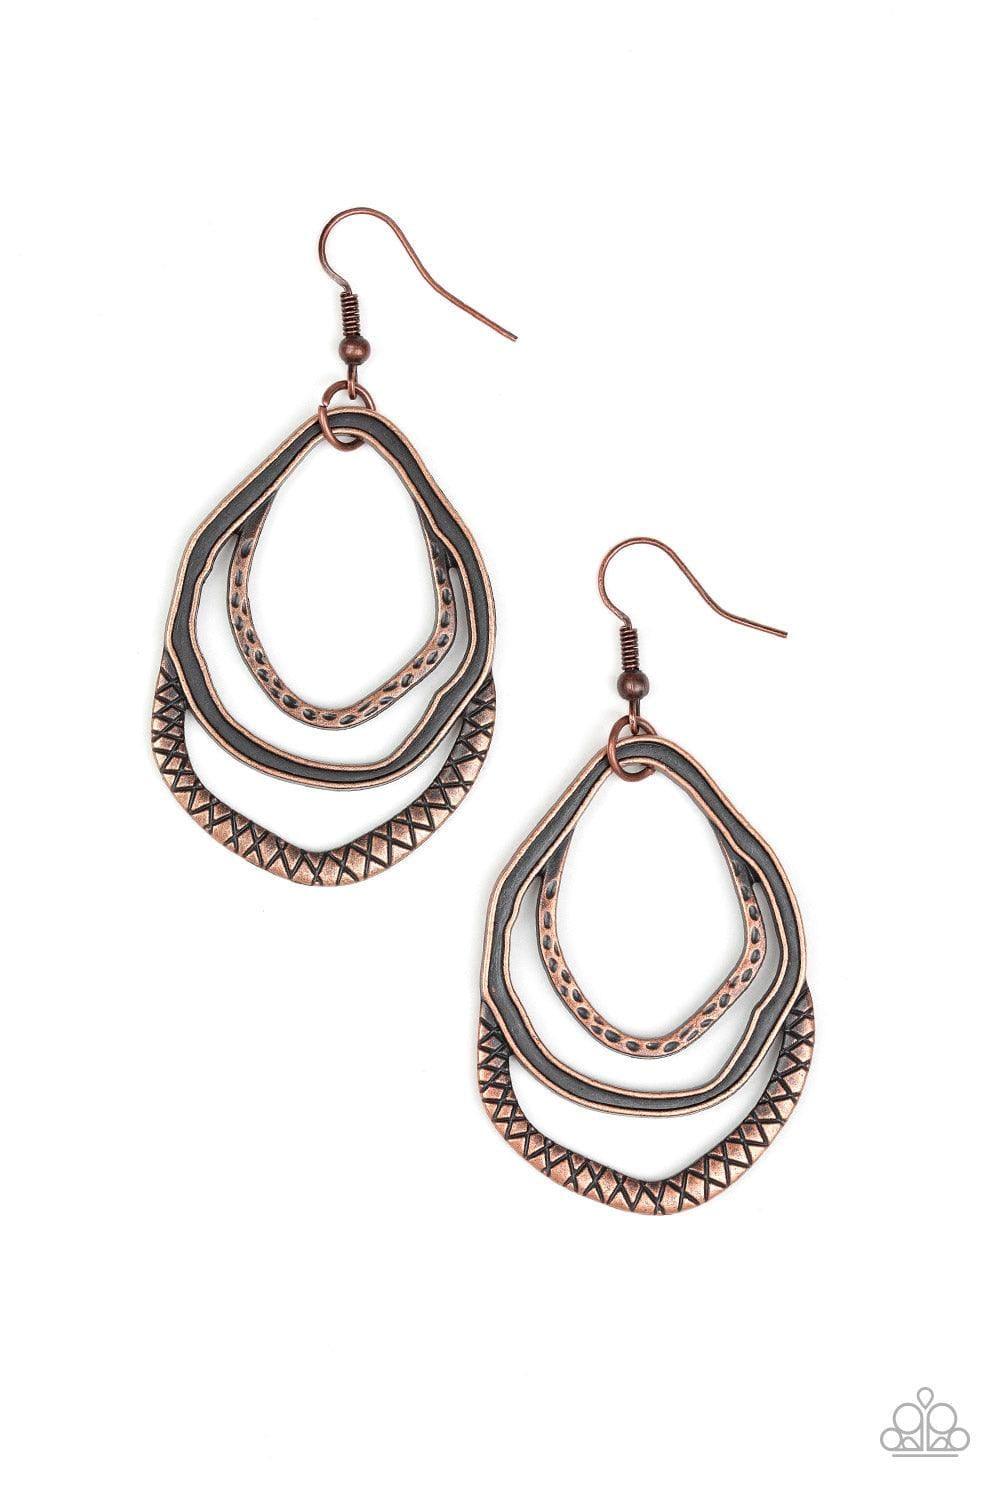 Paparazzi Accessories - Canyon Casual - Copper Earrings - Bling by JessieK